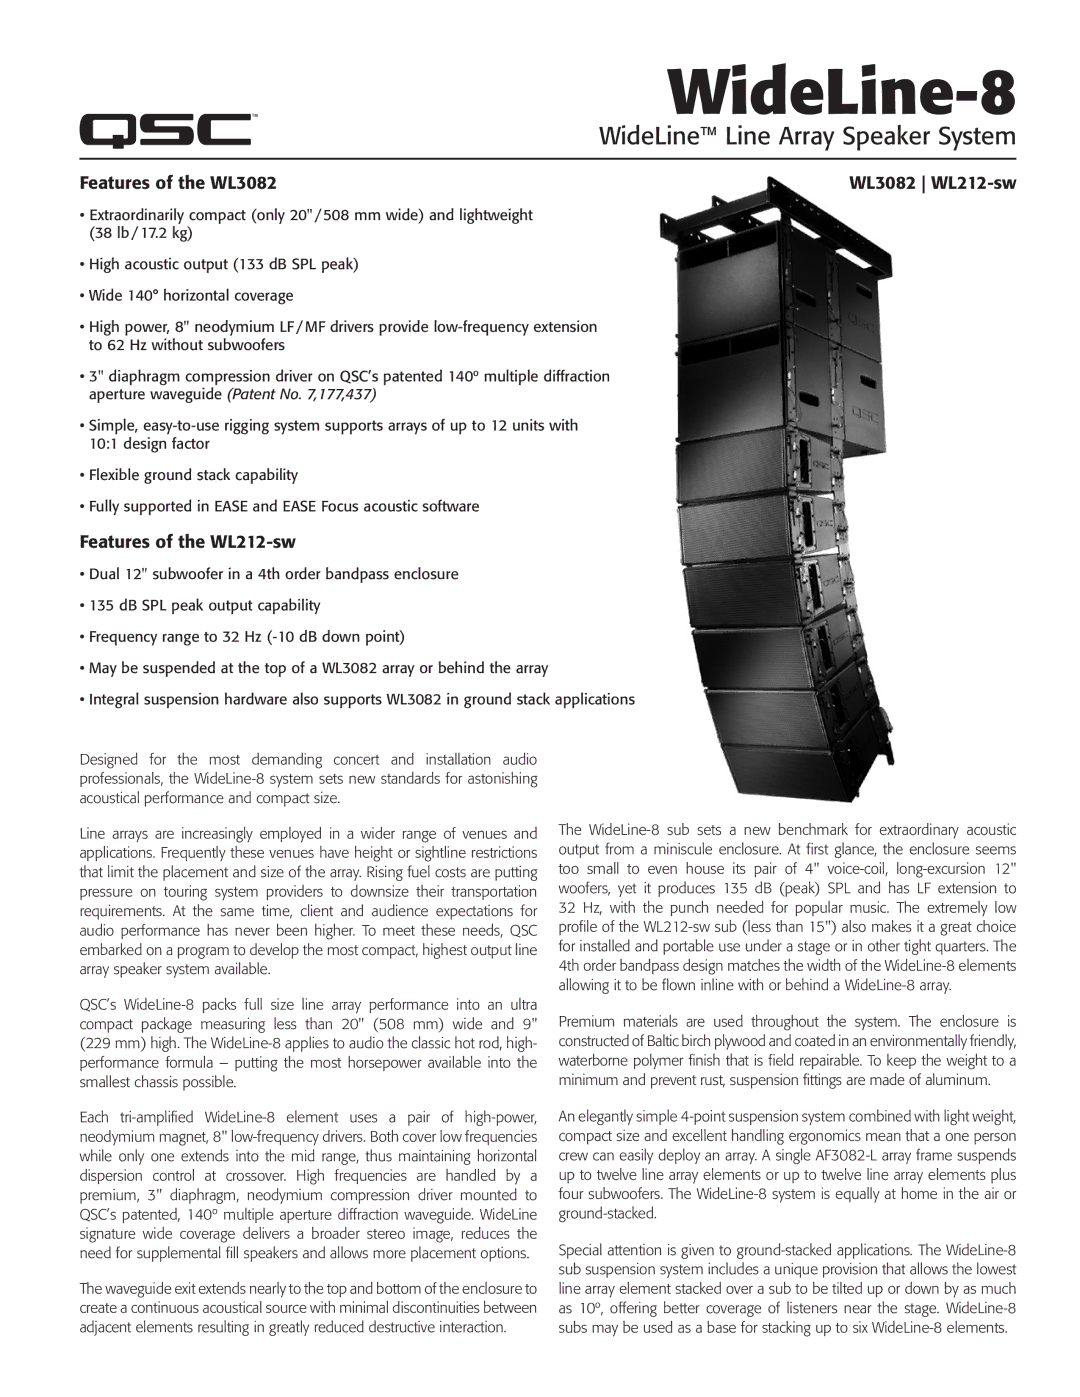 QSC Audio manual Features of the WL3082 WL3082 WL212-sw, Features of the WL212-sw 